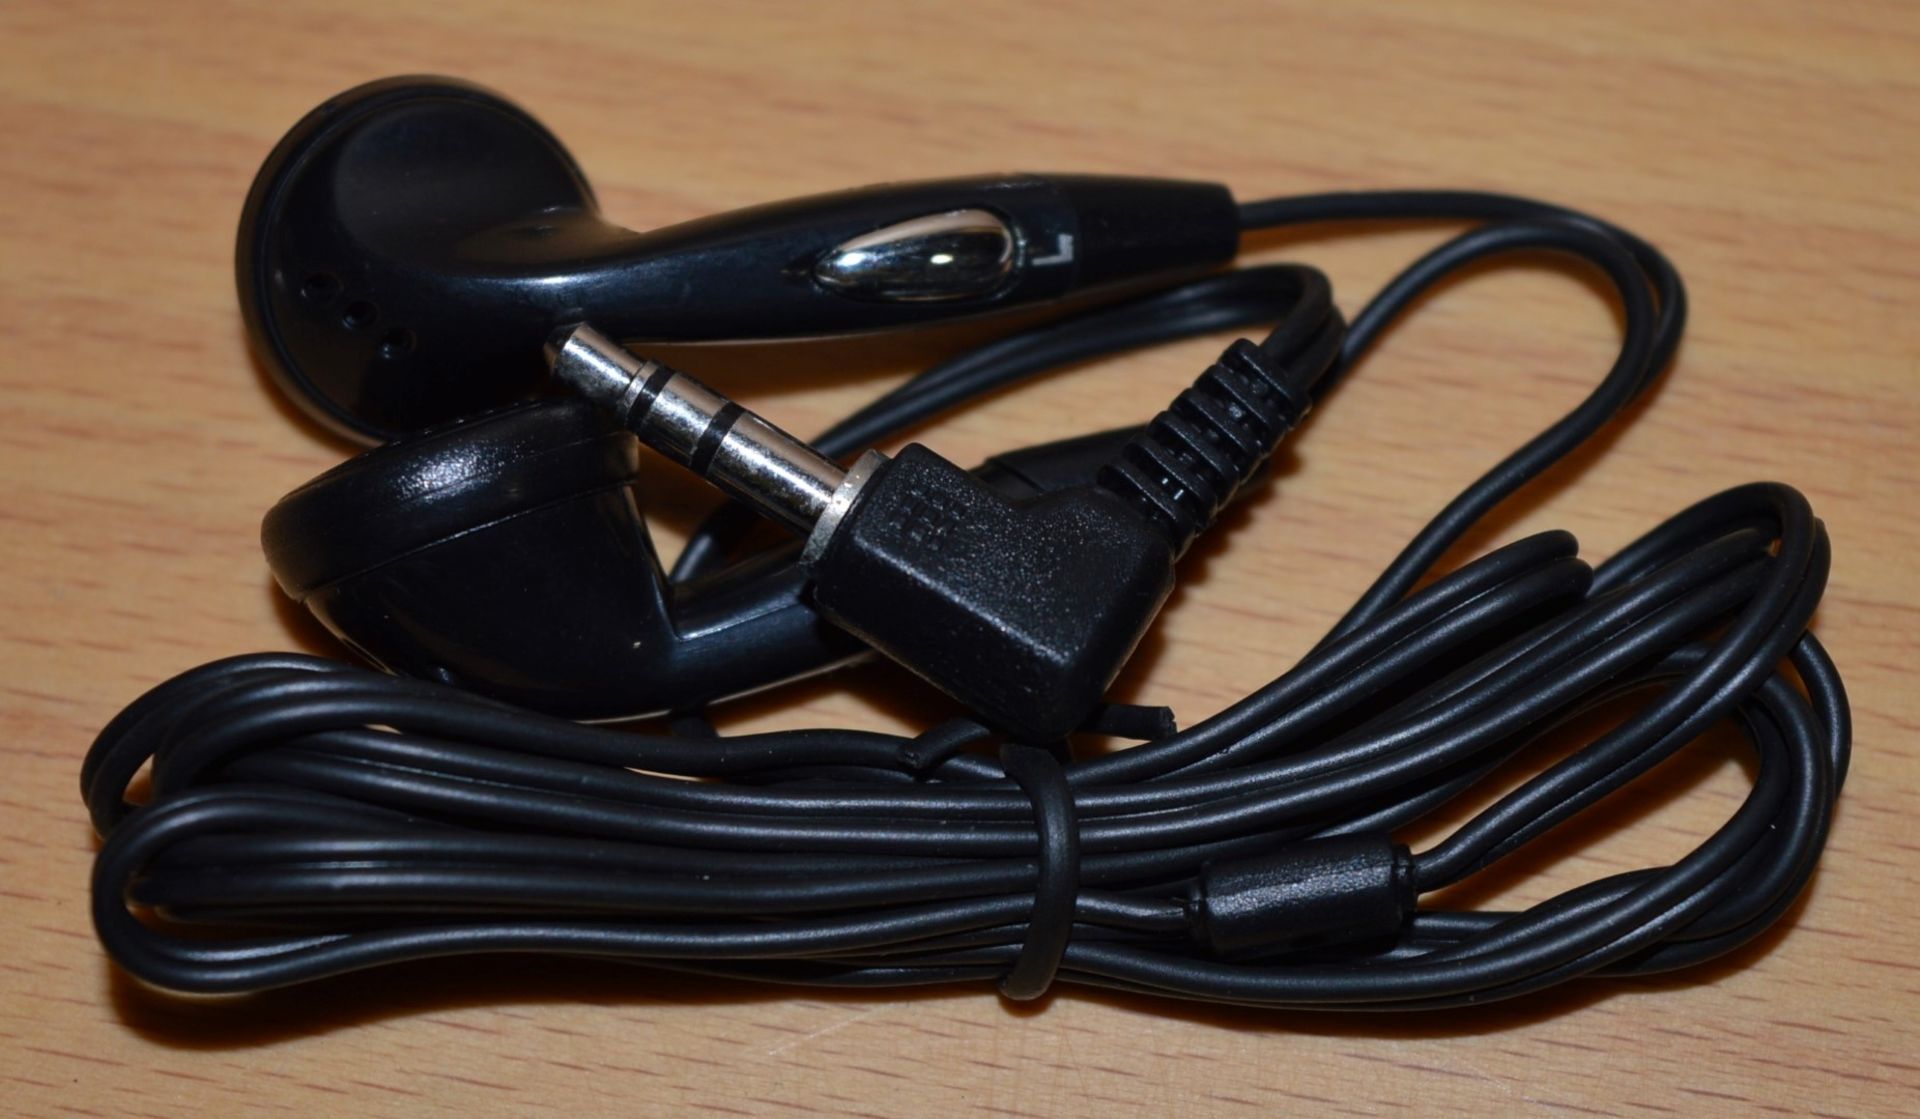 Approx 100 x Earbud Earphones - Type HL157 - 3.5mm Stereo Mini Plug - 32OHM - 107dB - New and Unused - Image 5 of 5